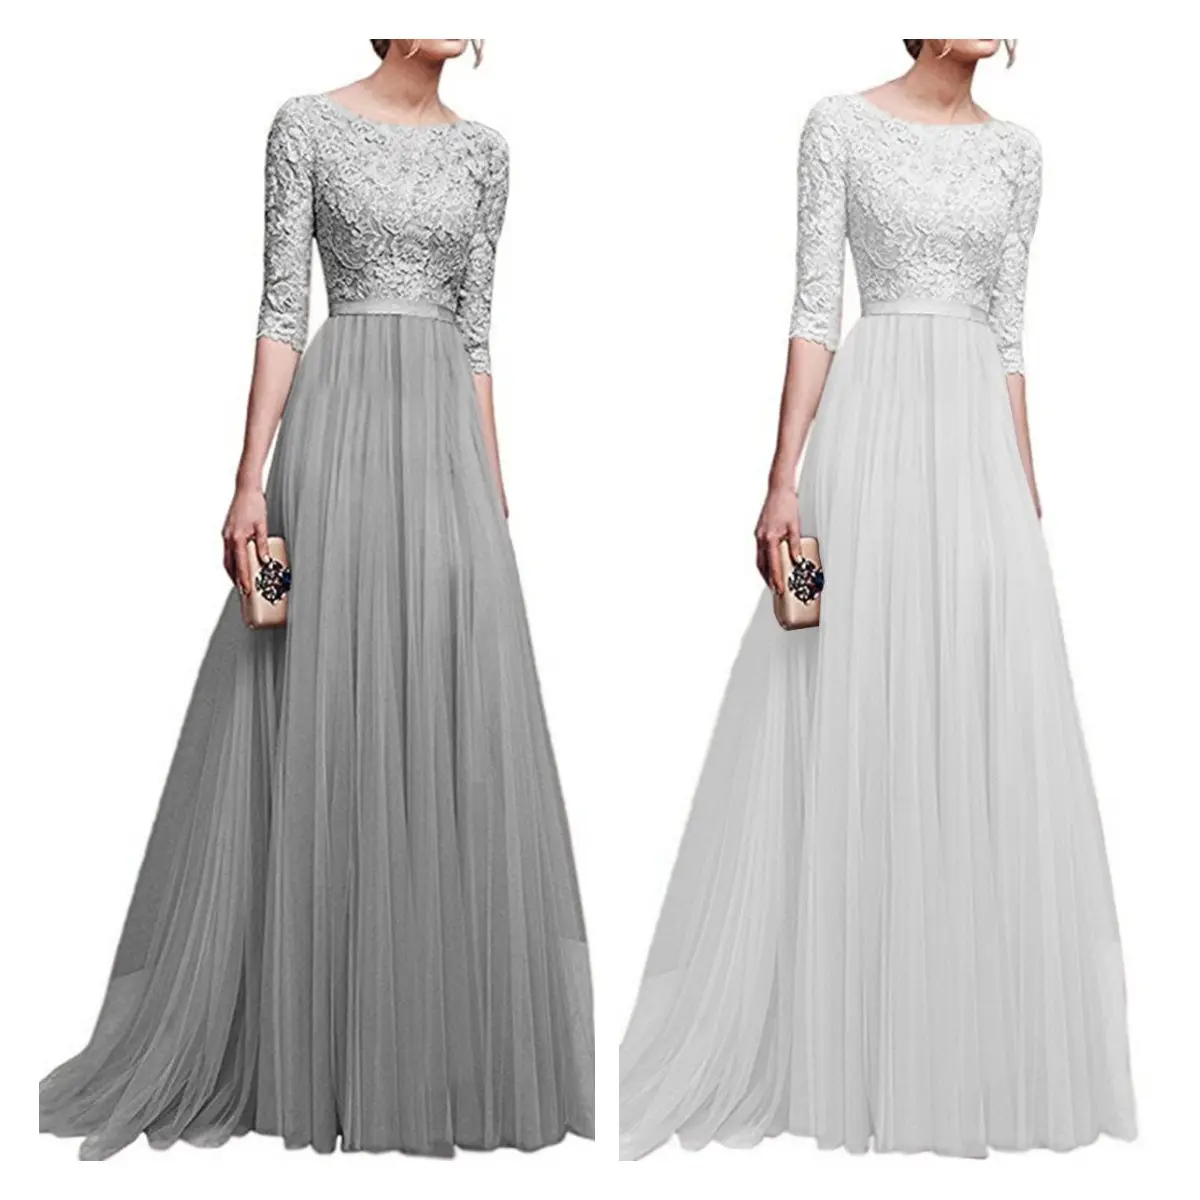 Europe America style fall winter new style lace ruched Tulle evening dress chiffon embroidered maxi women's dresses